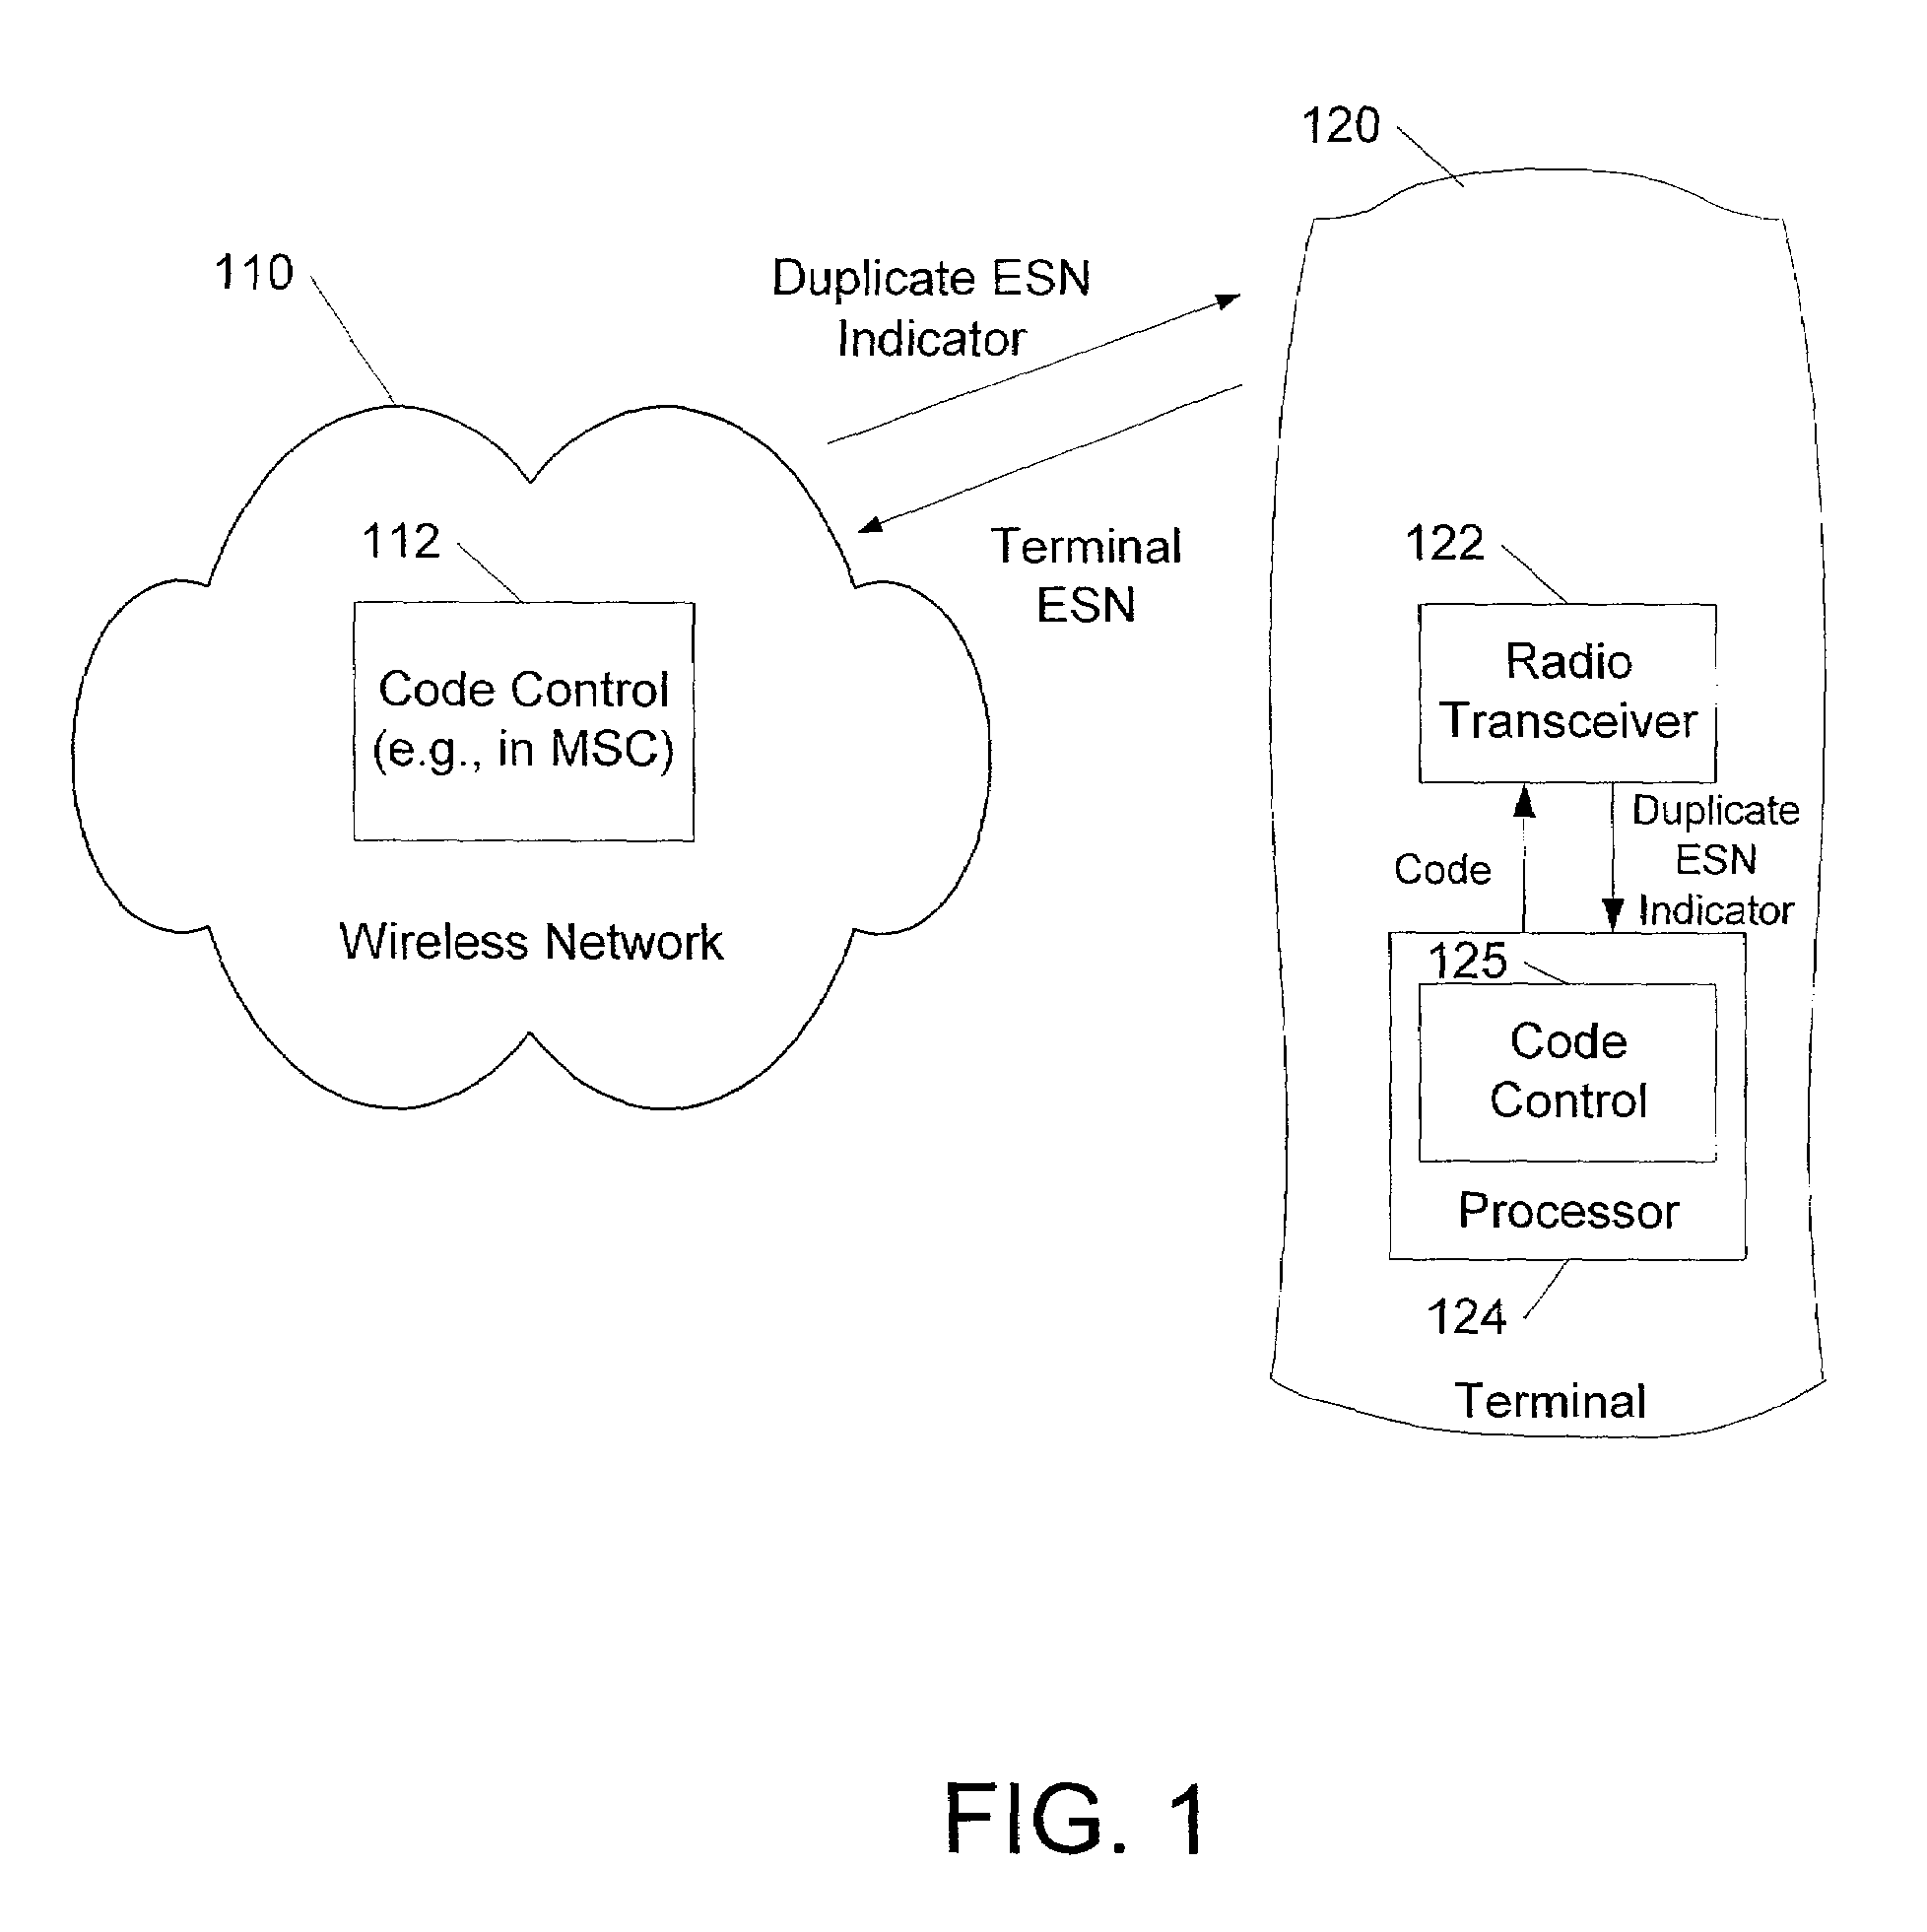 Methods, apparatus and computer program products for controlling a reverse link traffic channel code responsive to detection of a duplicate terminal identity